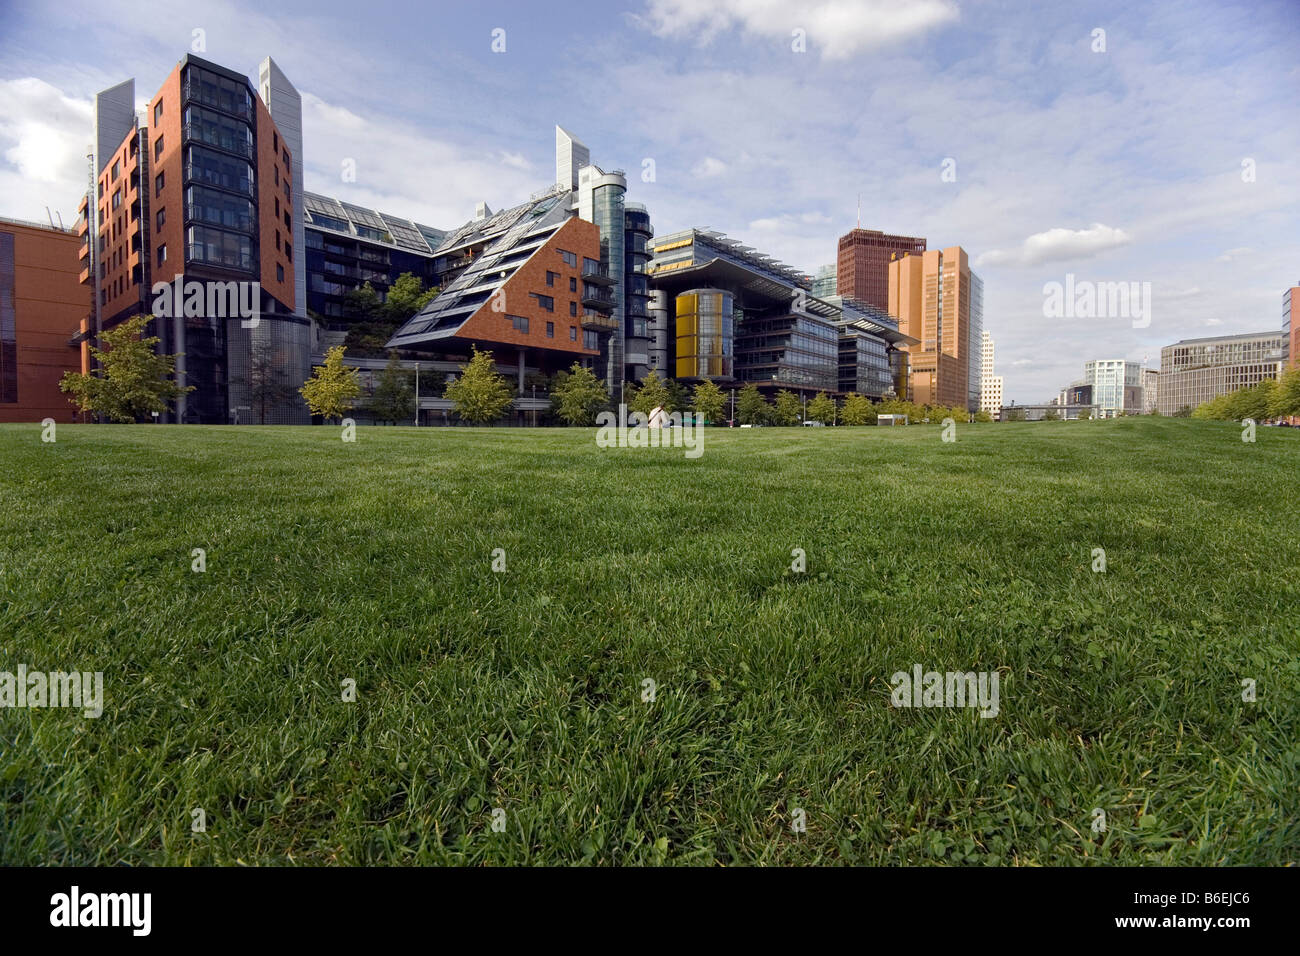 The Linkstrasse at the Potsdamer Platz Square with buildings of DaimlerChrysler, Berlin, Germany, Europe Stock Photo